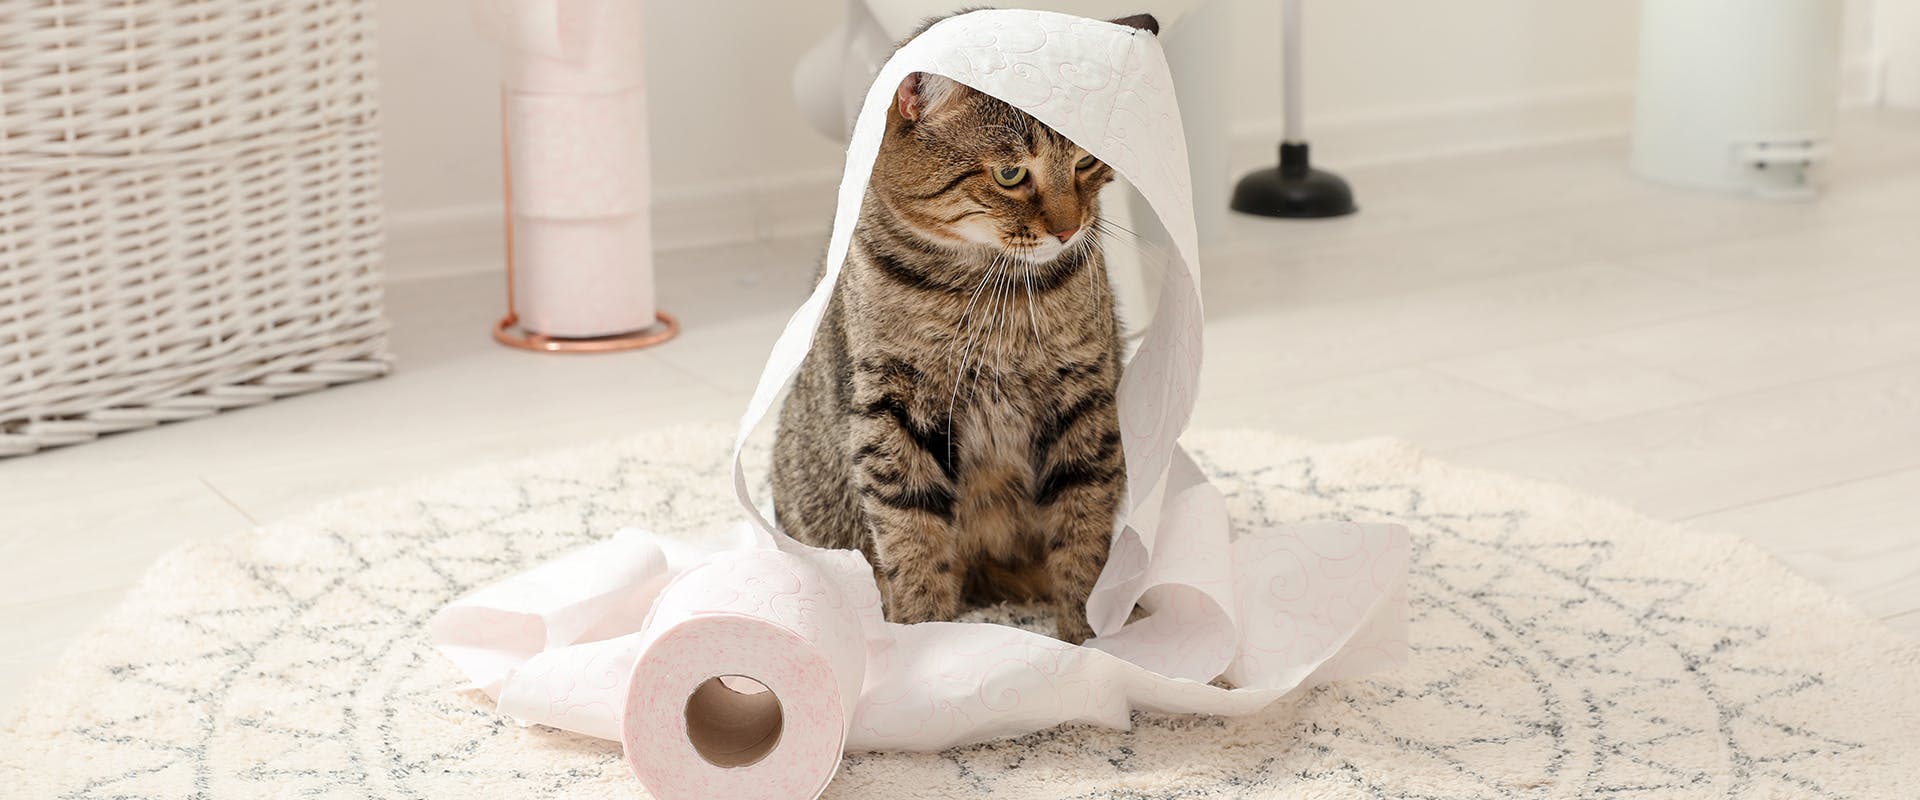 A cat in a bathroom, a roll of toiler paper unravelled around the cat's head